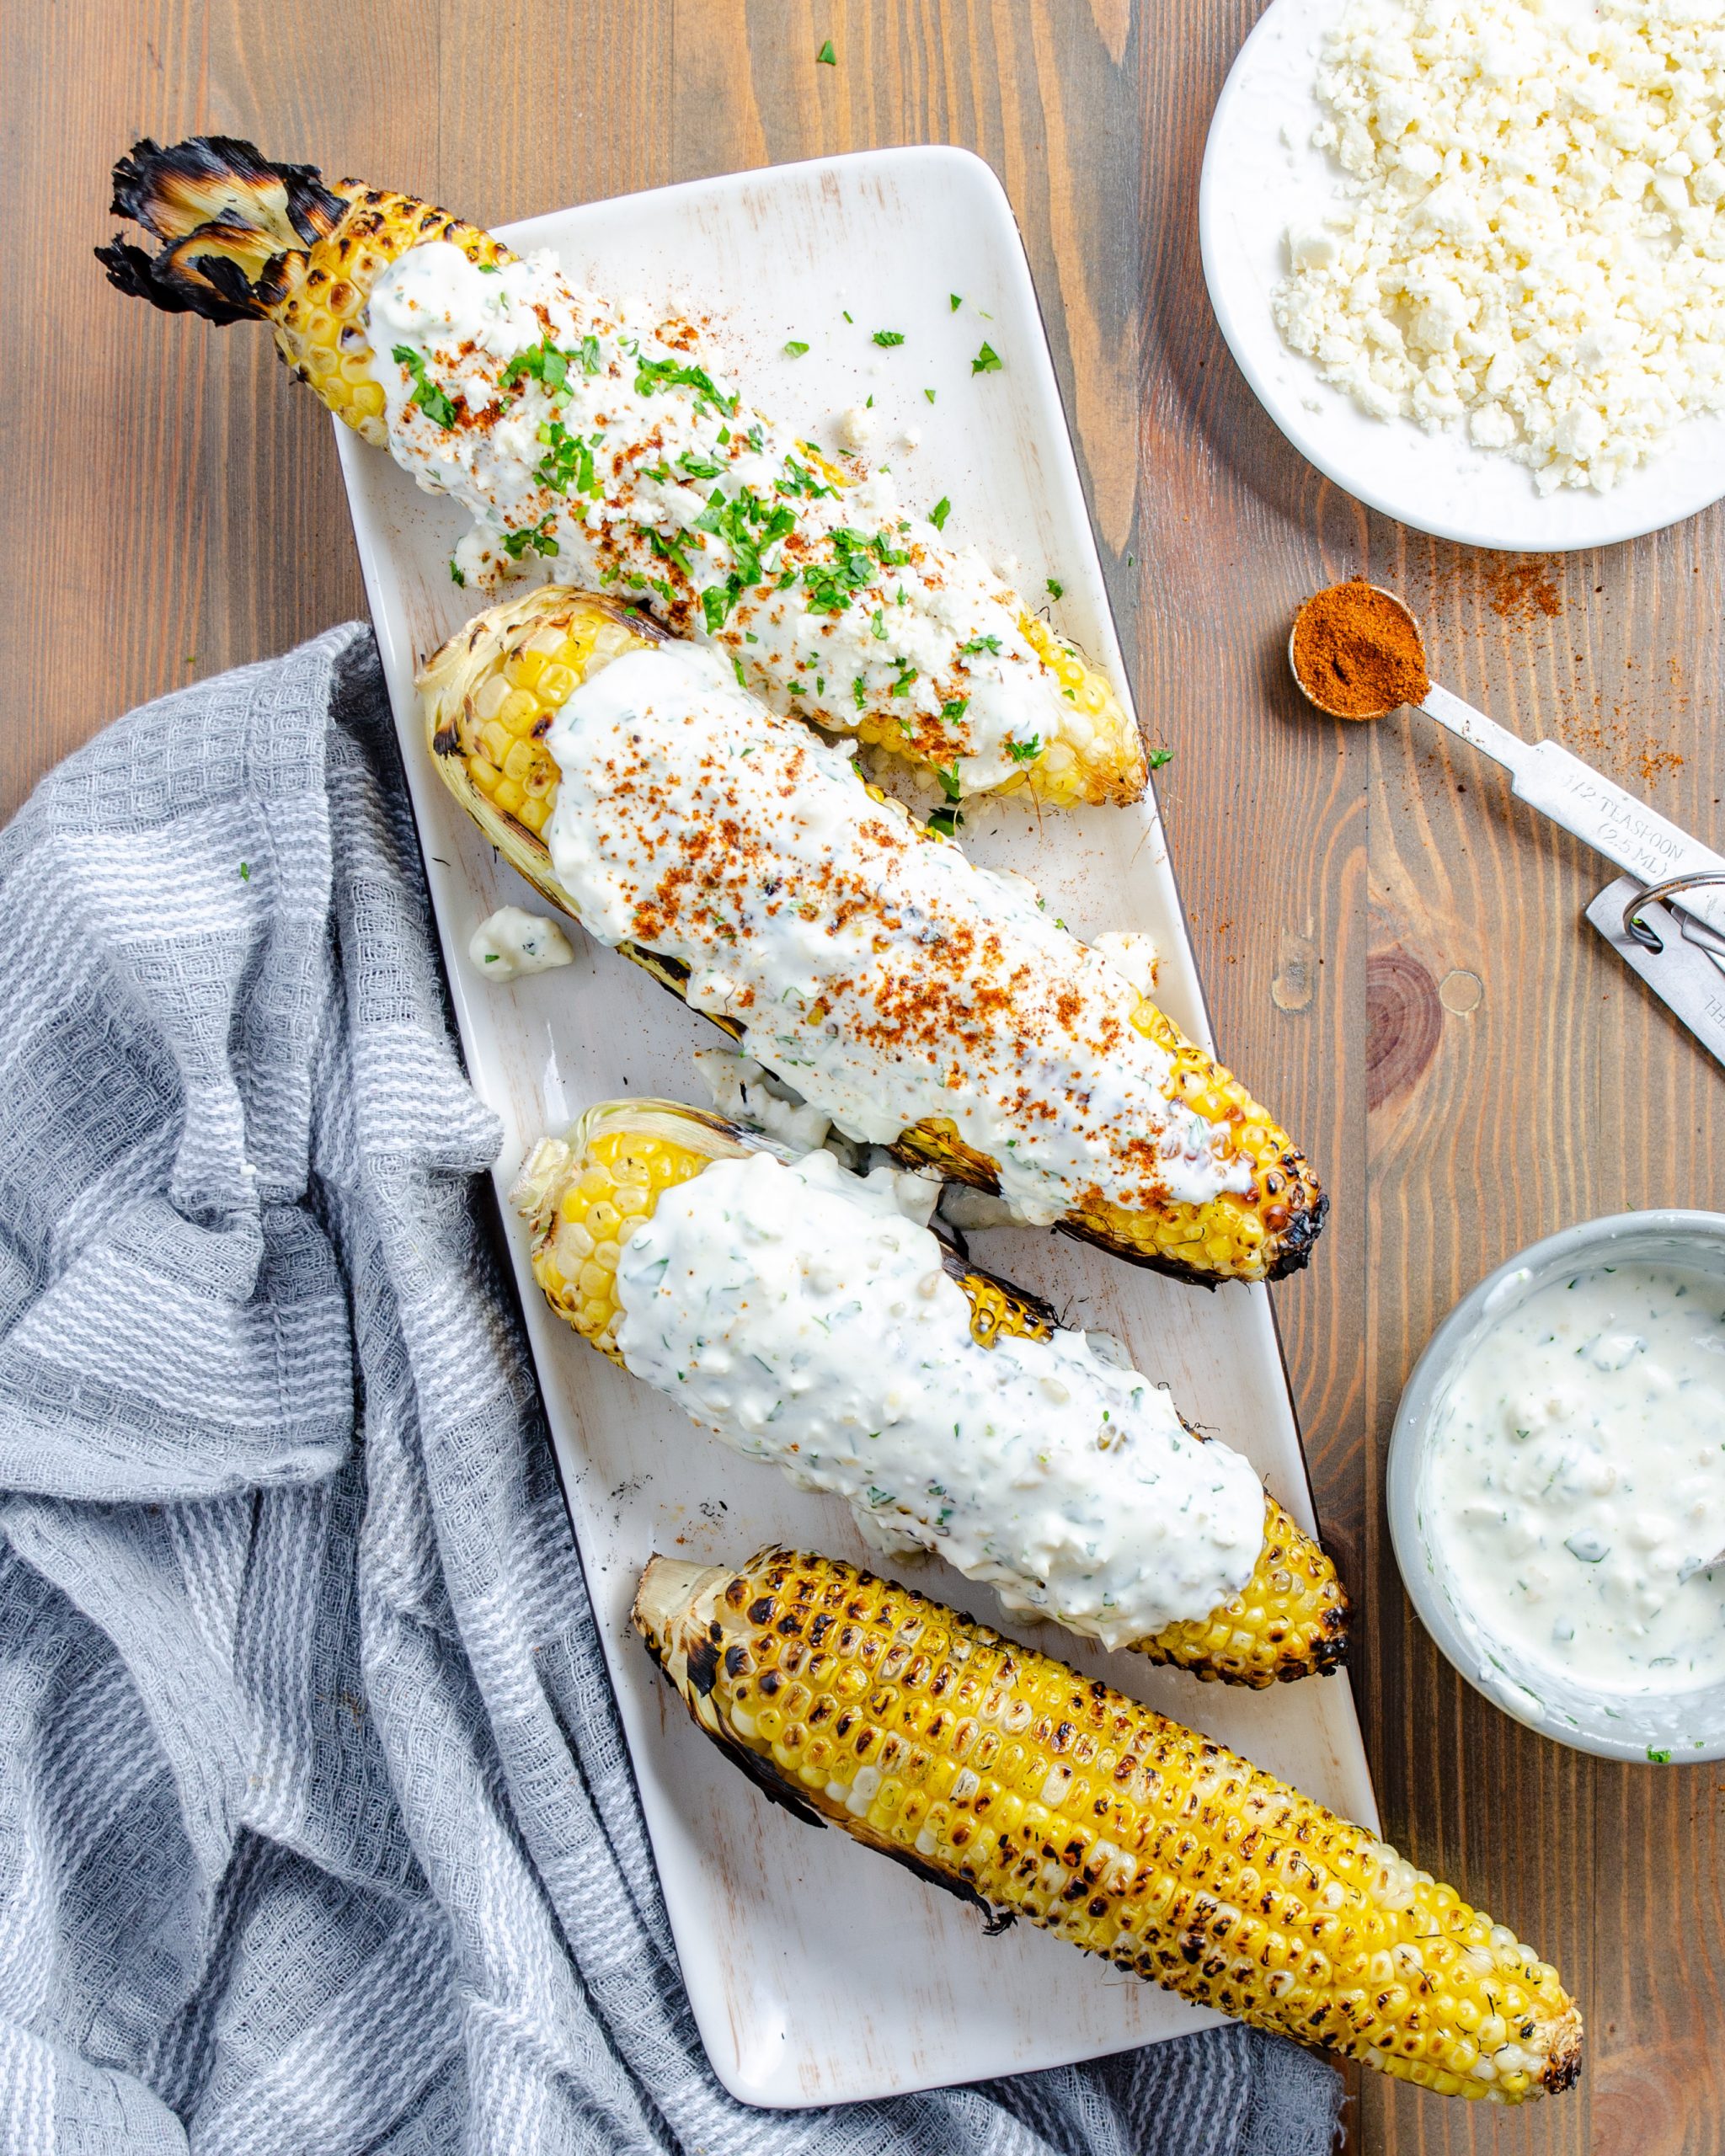 Spread mixture evenly over each ear of corn, then sprinkle with chipotle chili powder. Top with extra cotija cheese and chopped cilantro and serve.